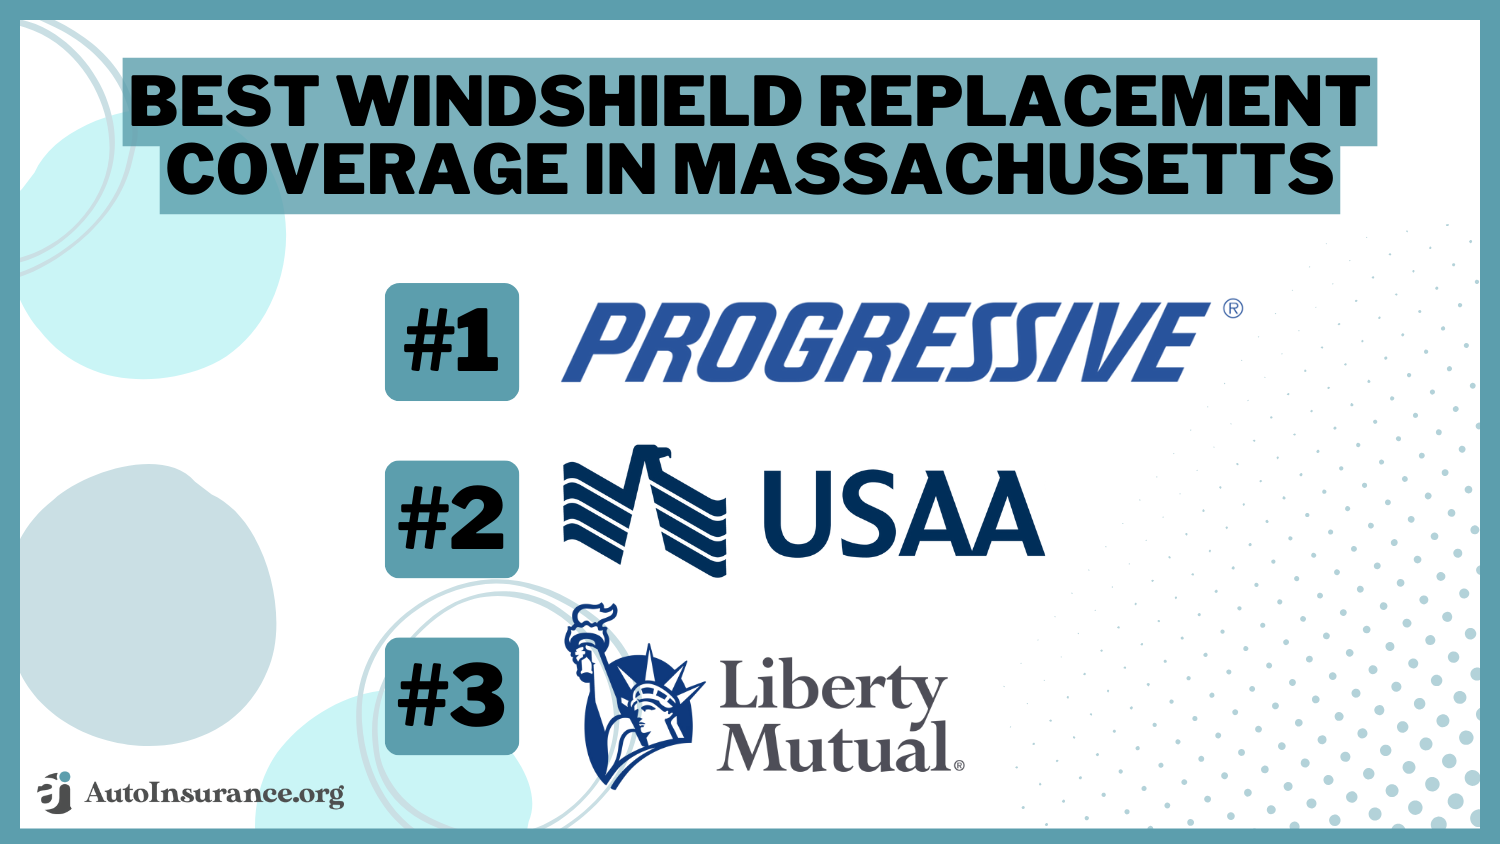 Best Windshield Replacement Coverage in Massachusetts: Progressive, USAA, and Liberty Mutual